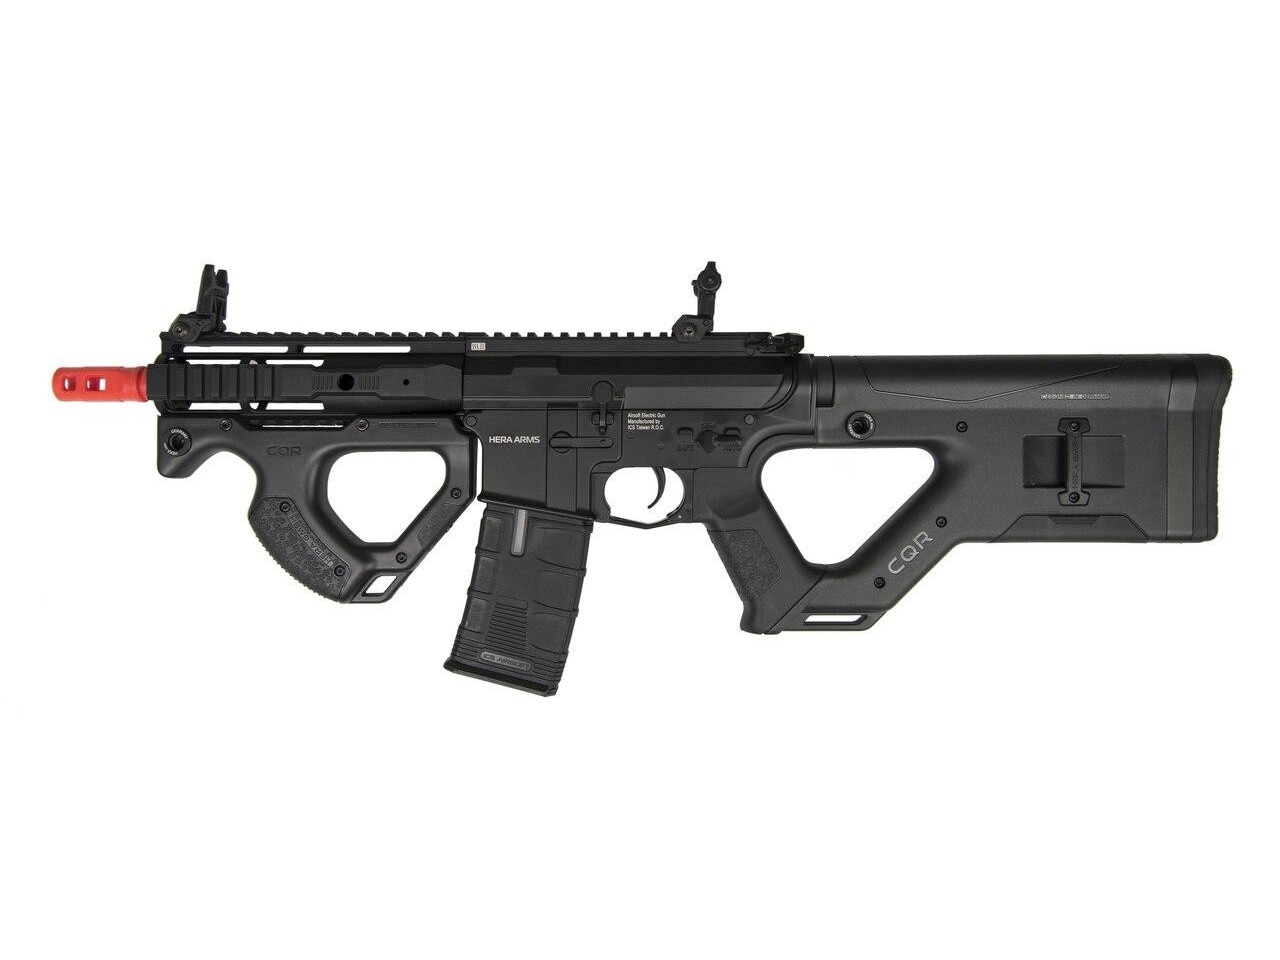 ASG HERA ARMS CQR SSS Airsoft Rifle w/ MOSFET